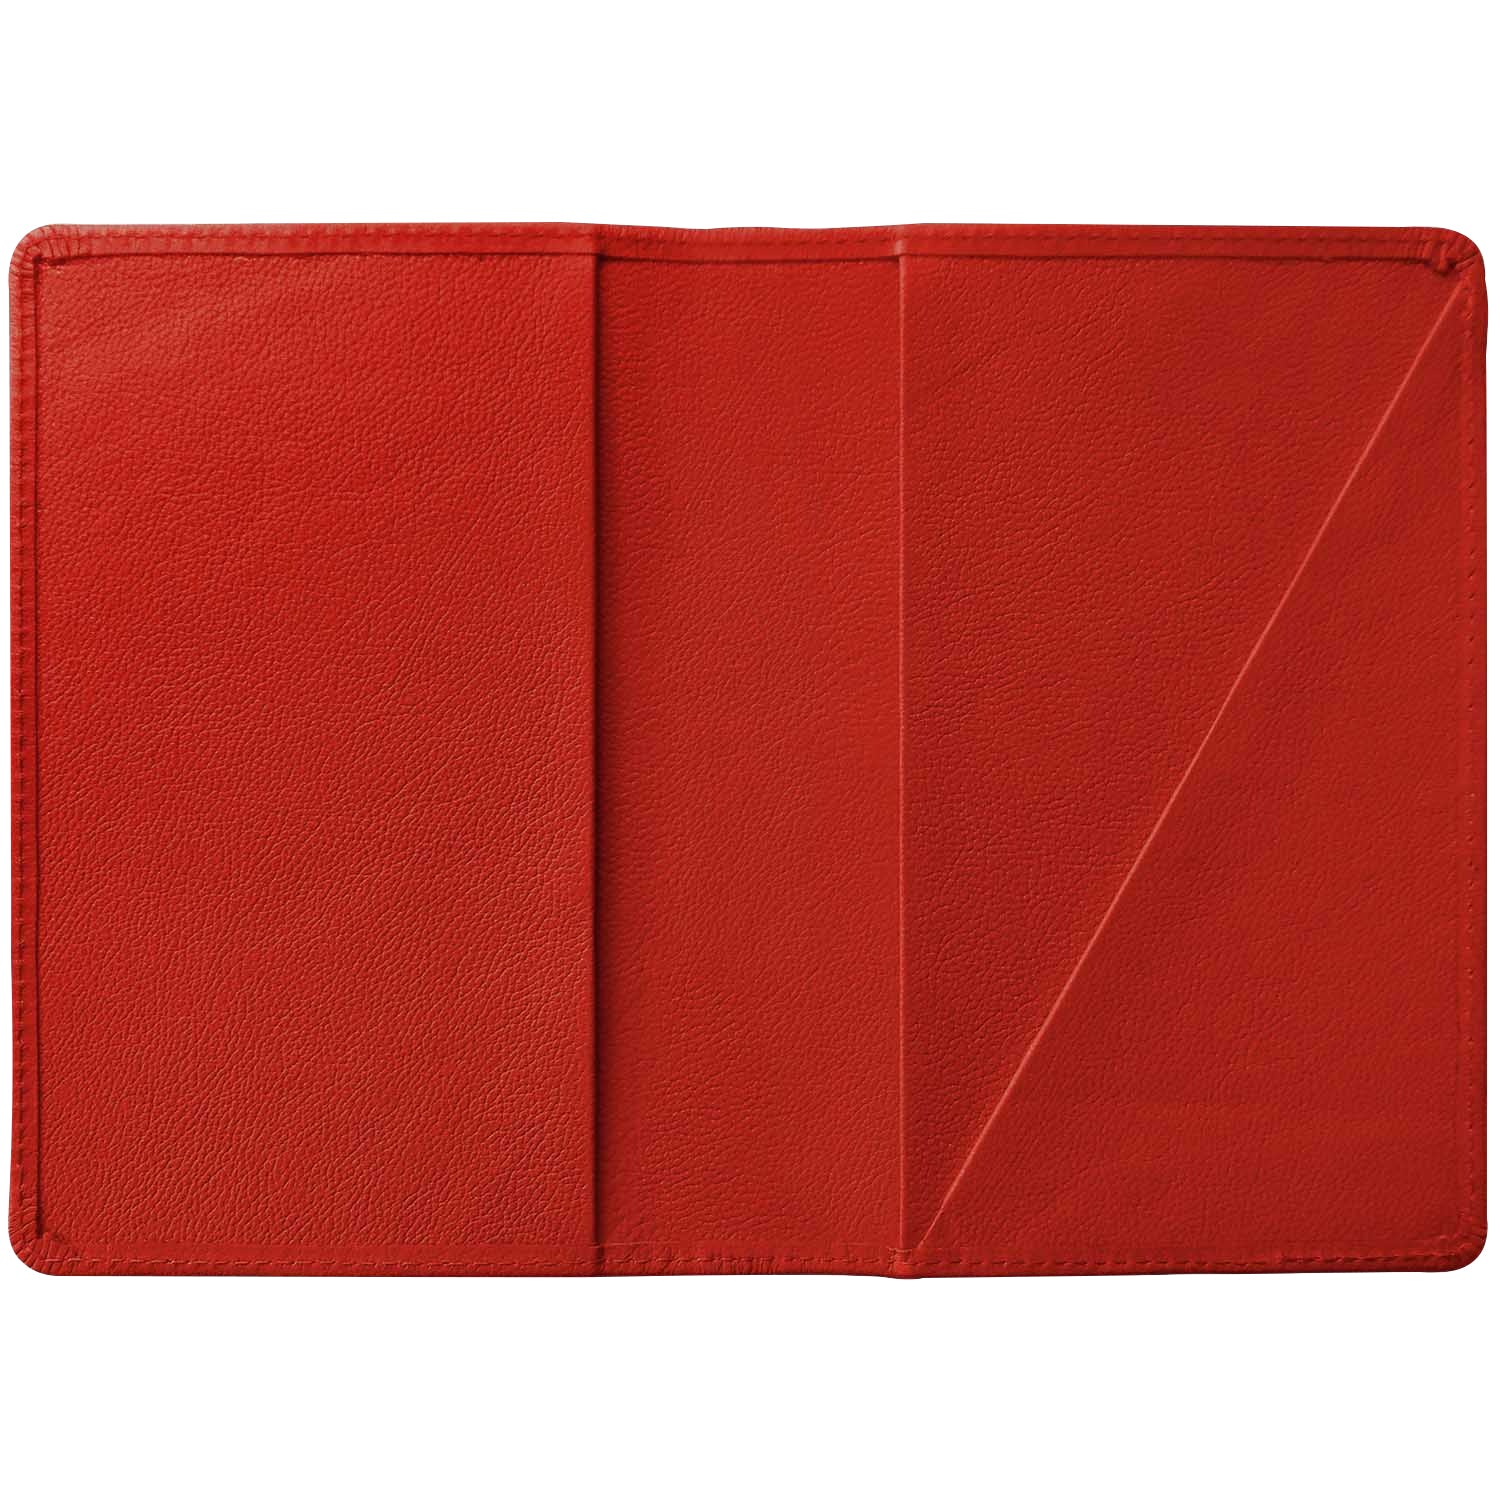 Leathersmith of London Mayfair Red Wallet-Notebook-Goviers